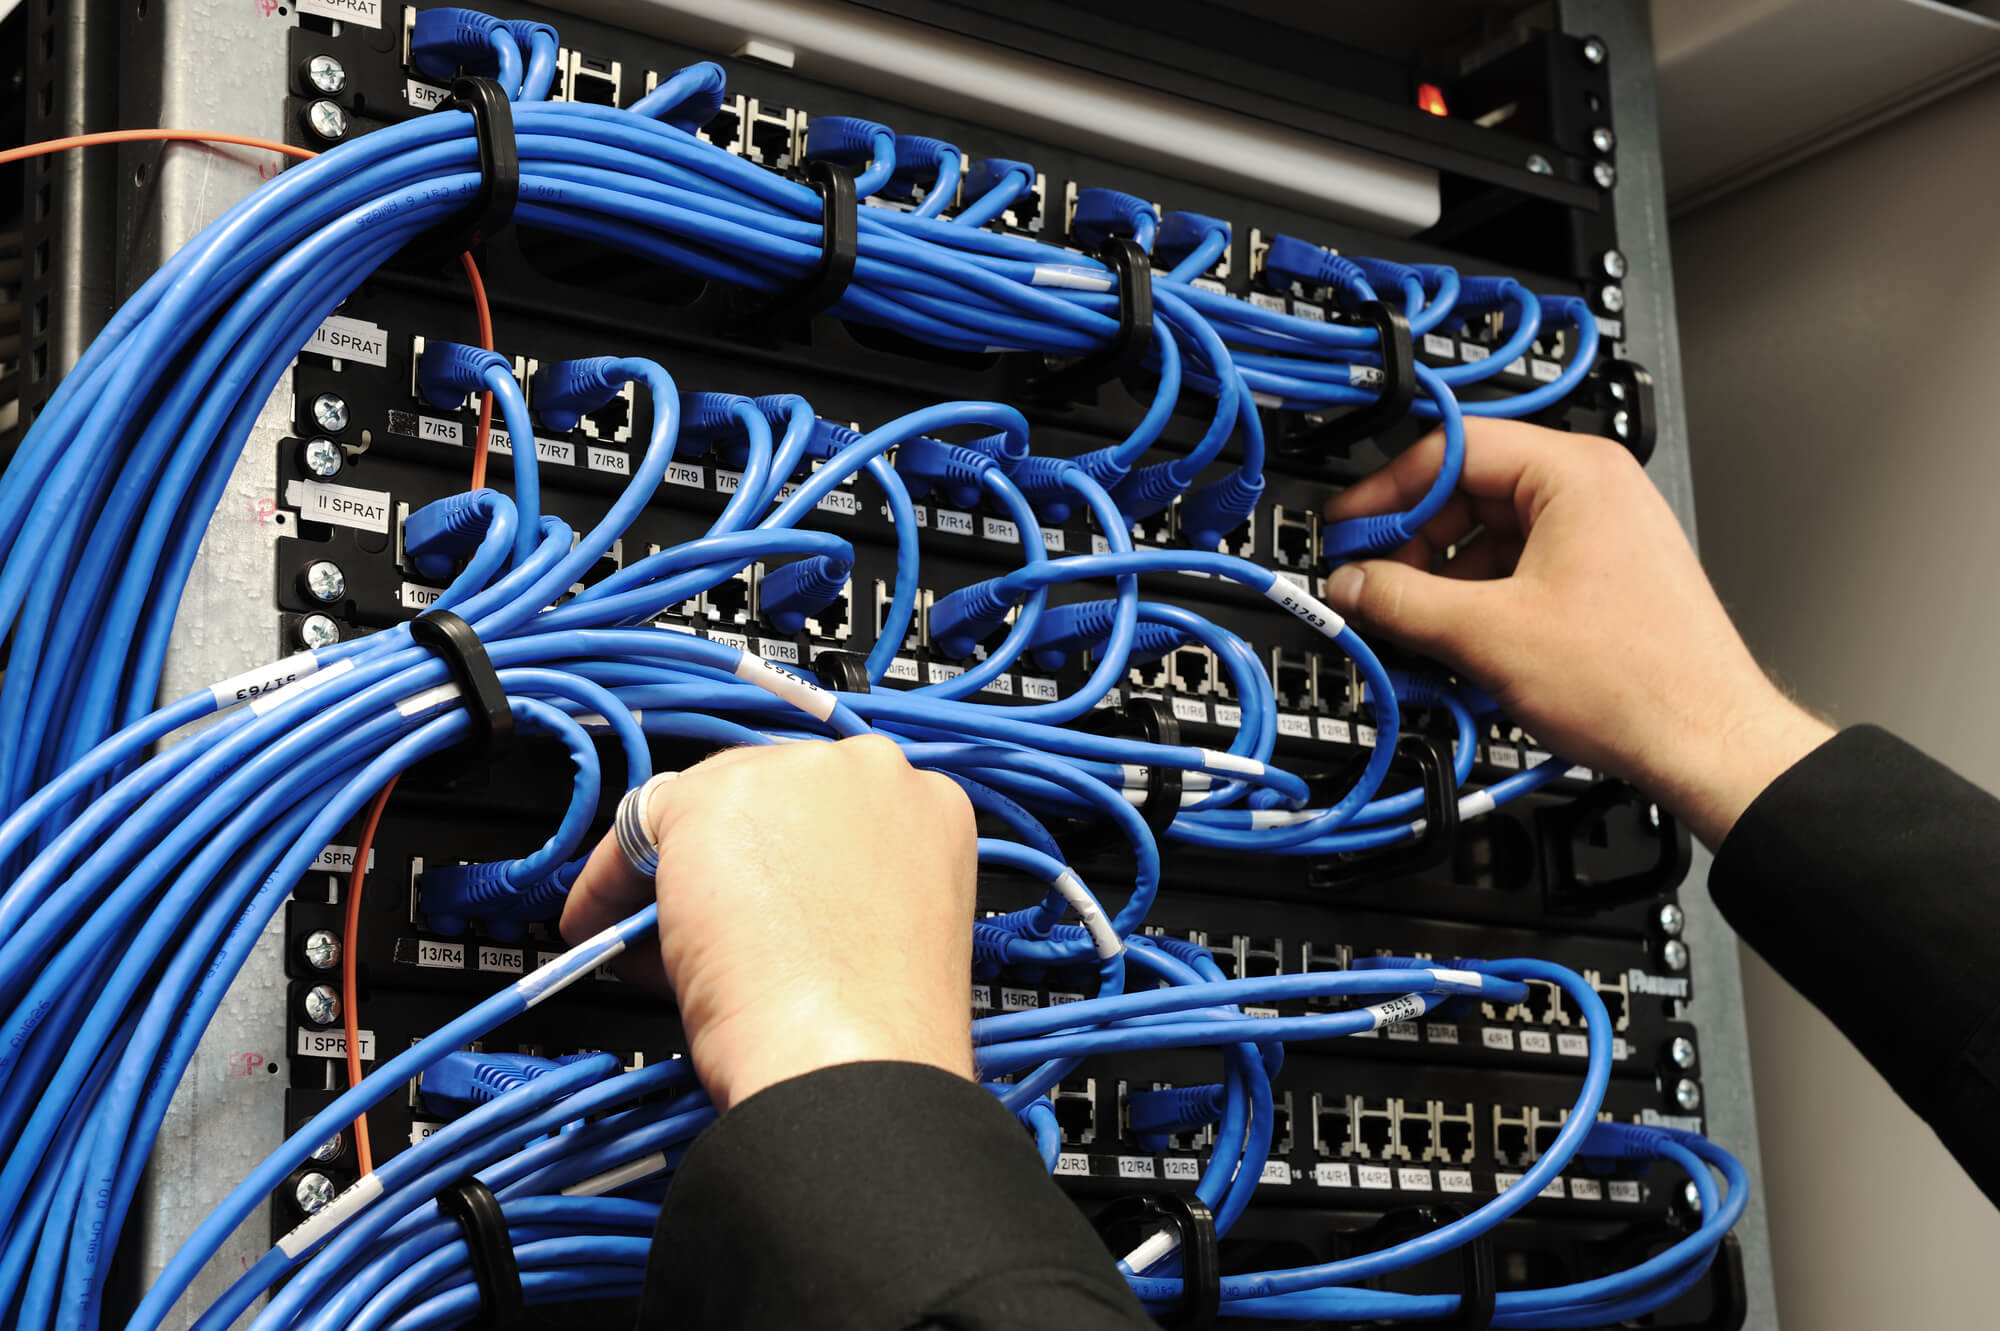 man handling an IT server with blue cables